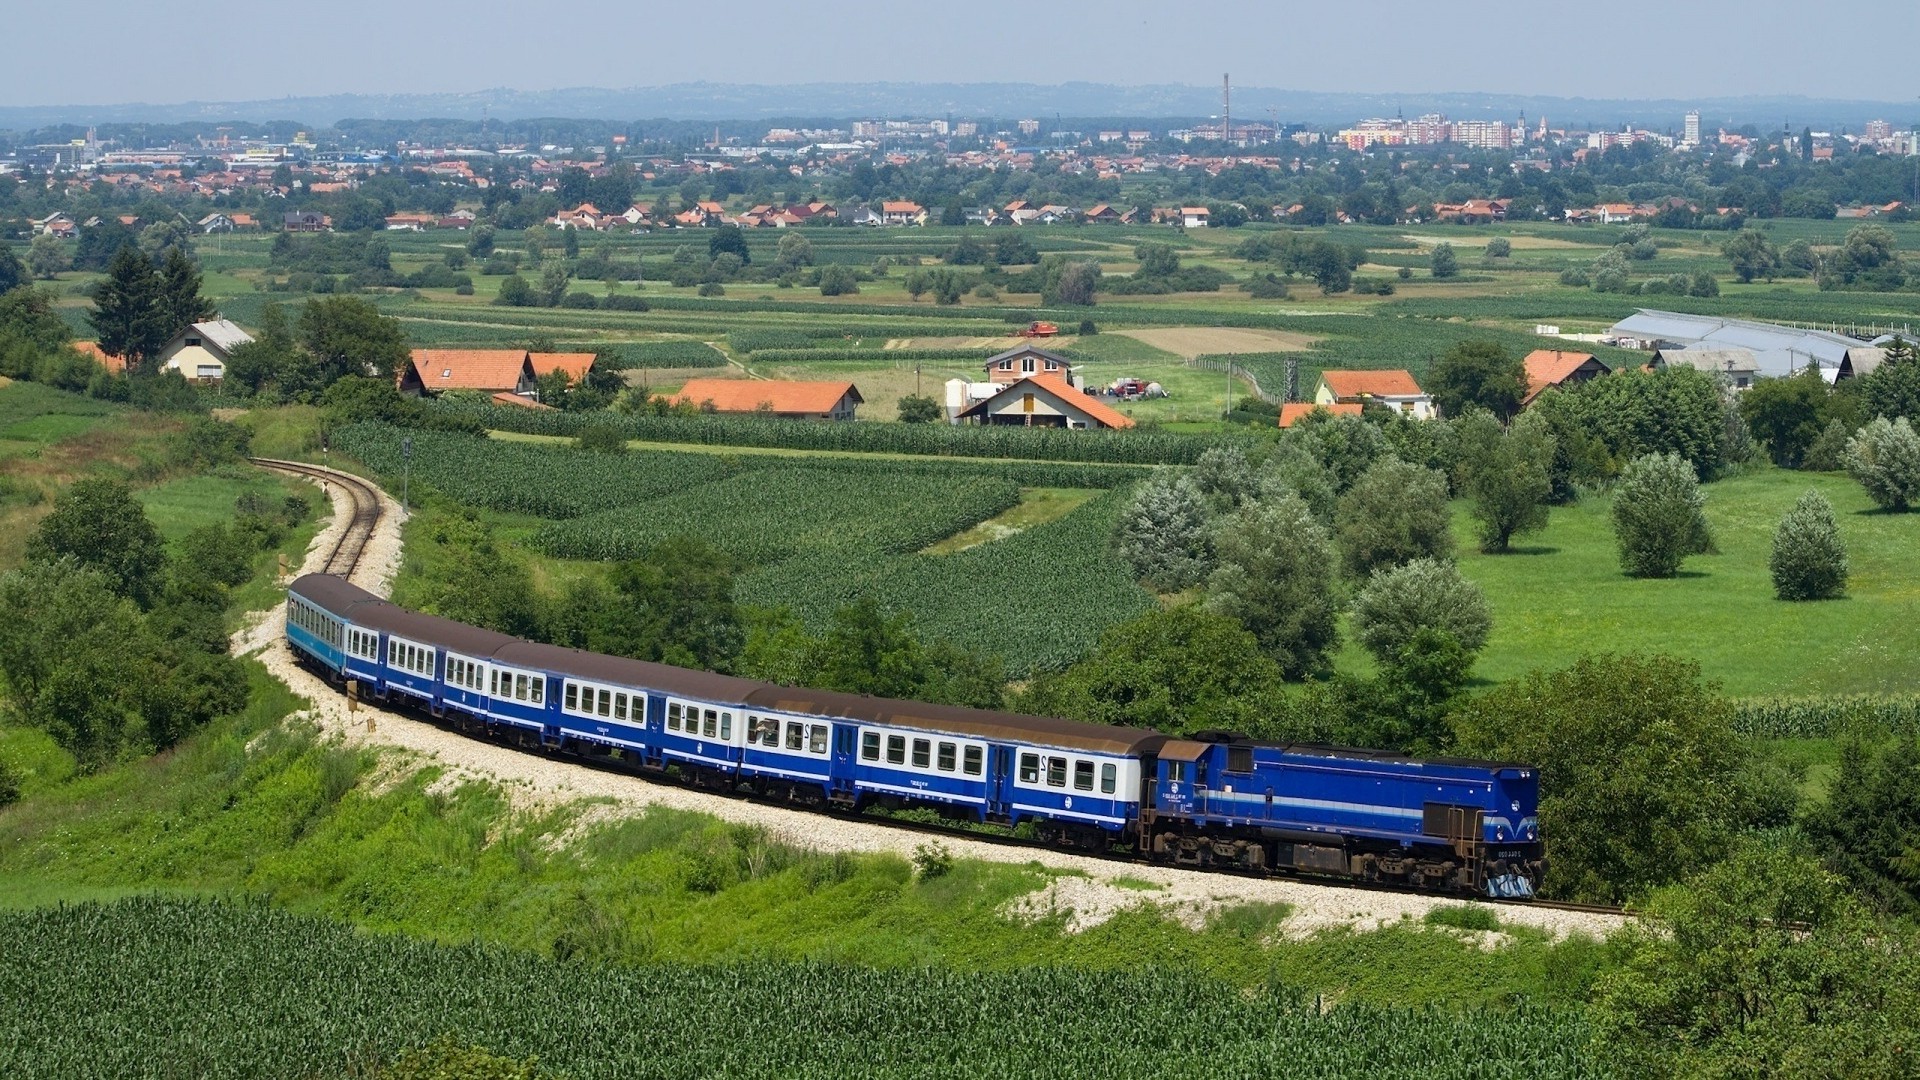 1920x1080 wallpapers: train, structure, blue, fields, from above, railway, distance, outskirts, summer, city (image)